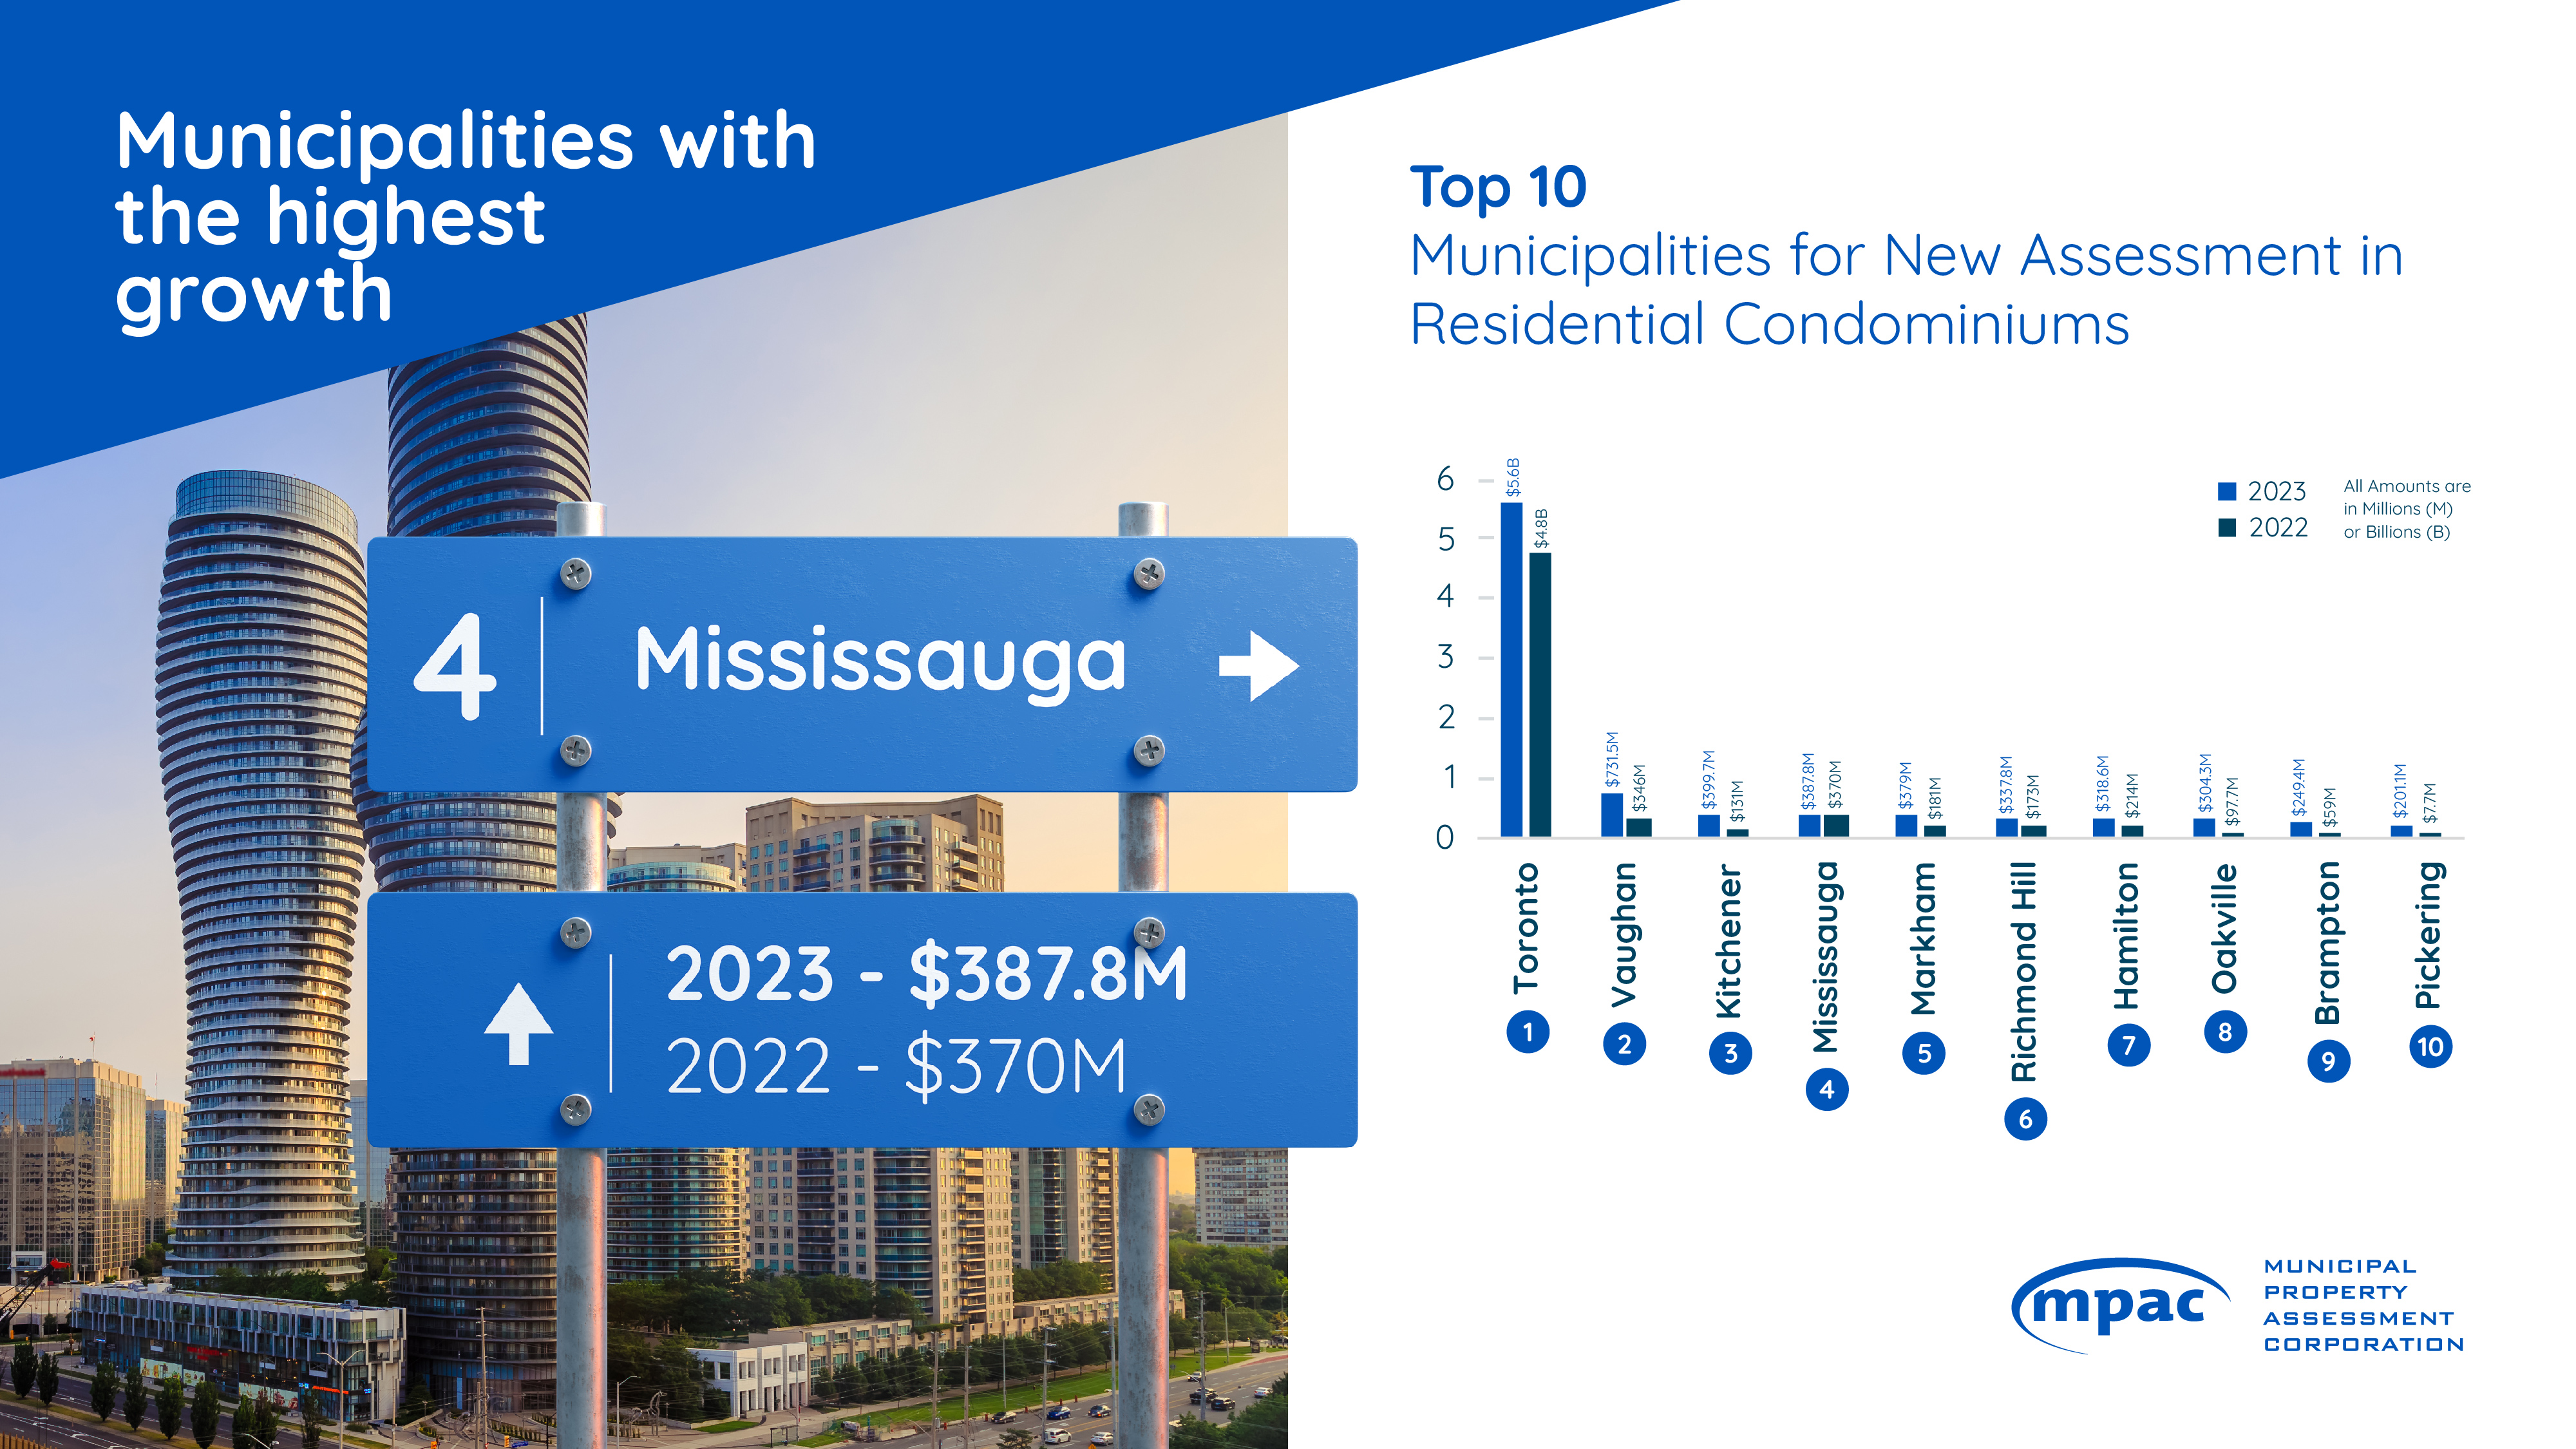 Top 10 Municipalities for New Assessment in Residential Condominiums